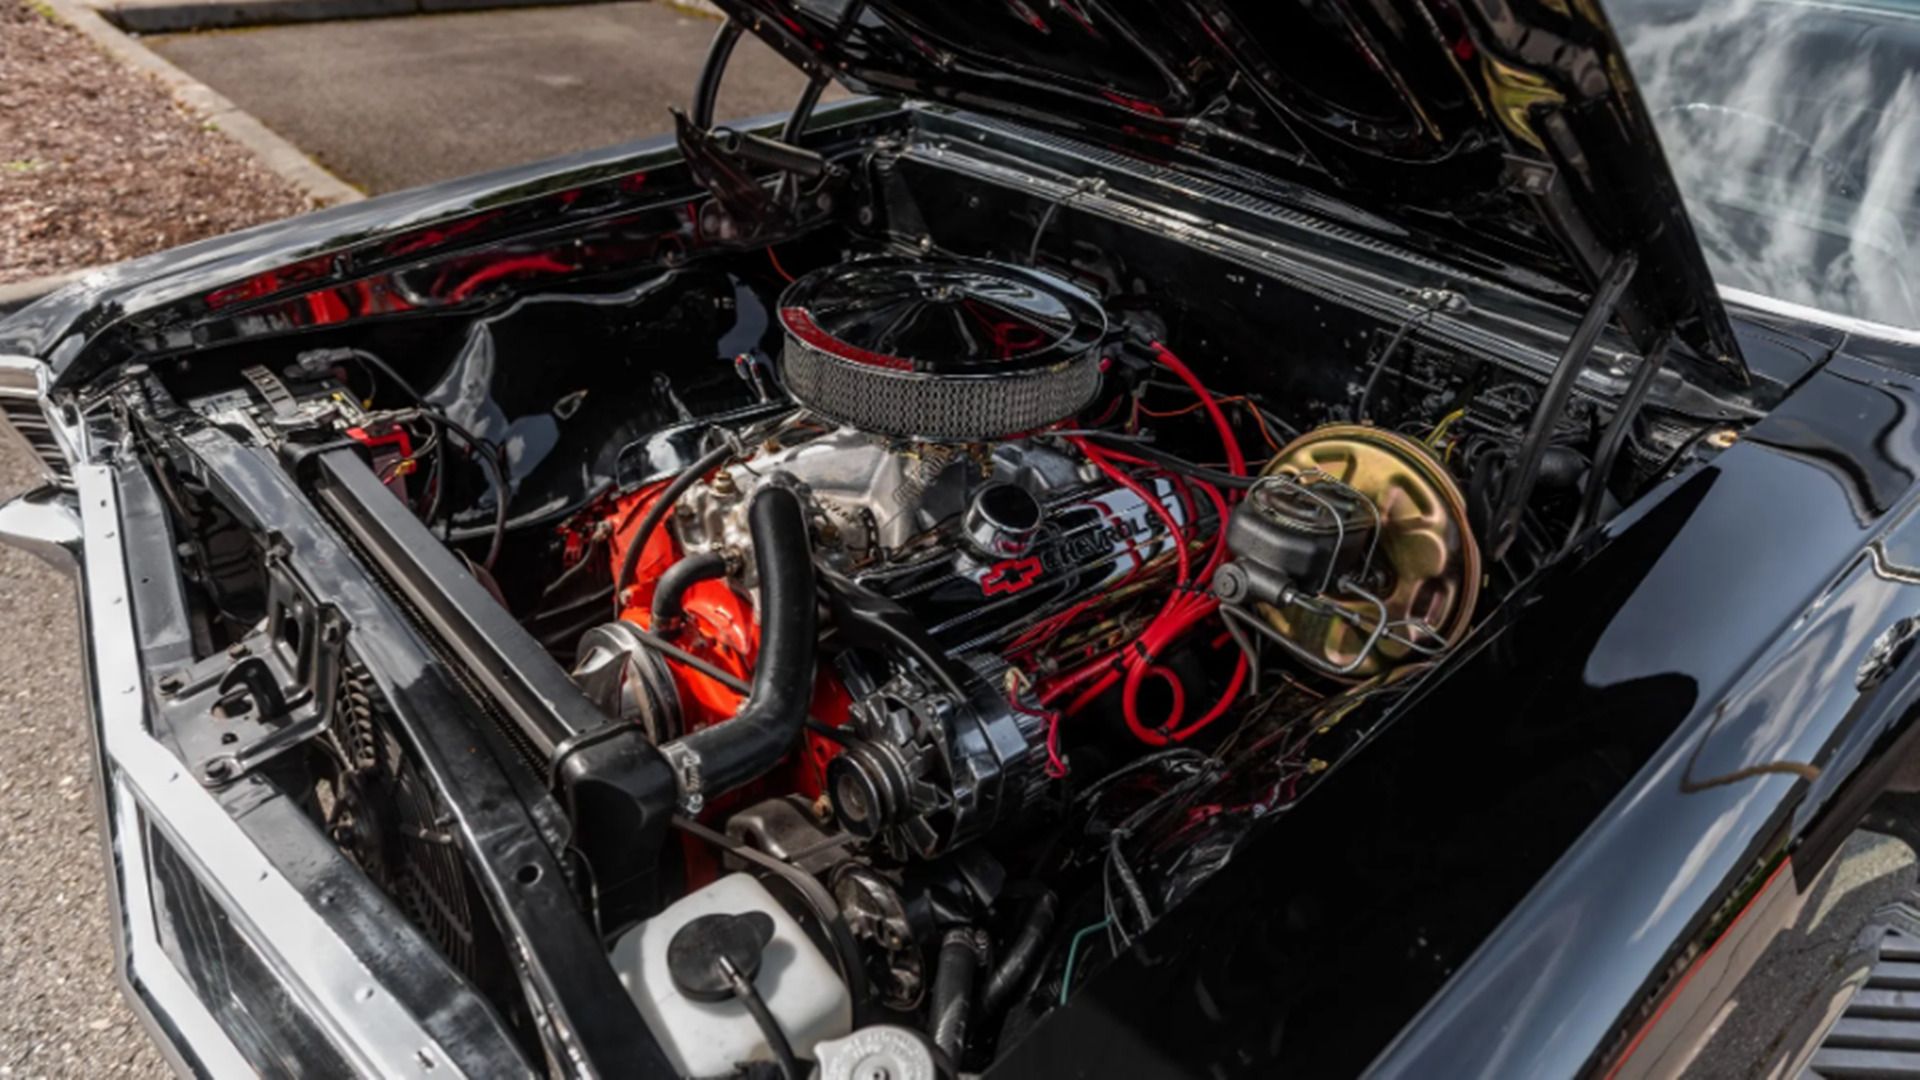 1967 chevy chevelle engine options and power compared